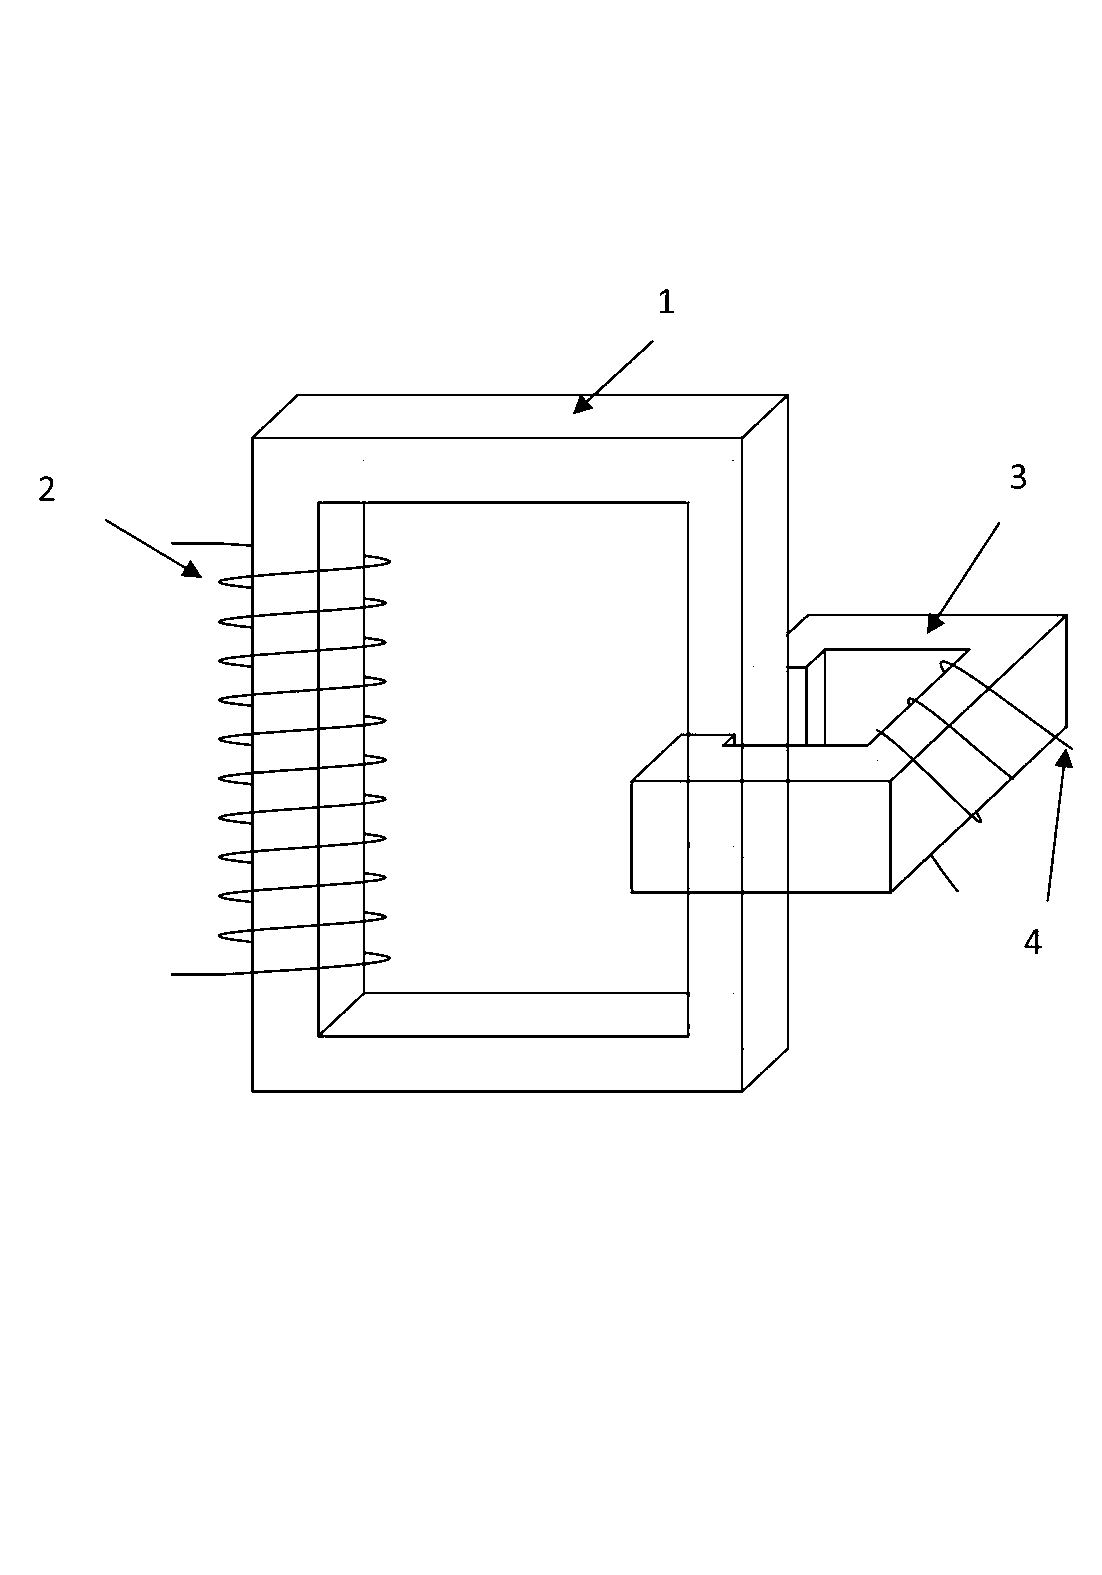 Crossed iron core type controlled reactor